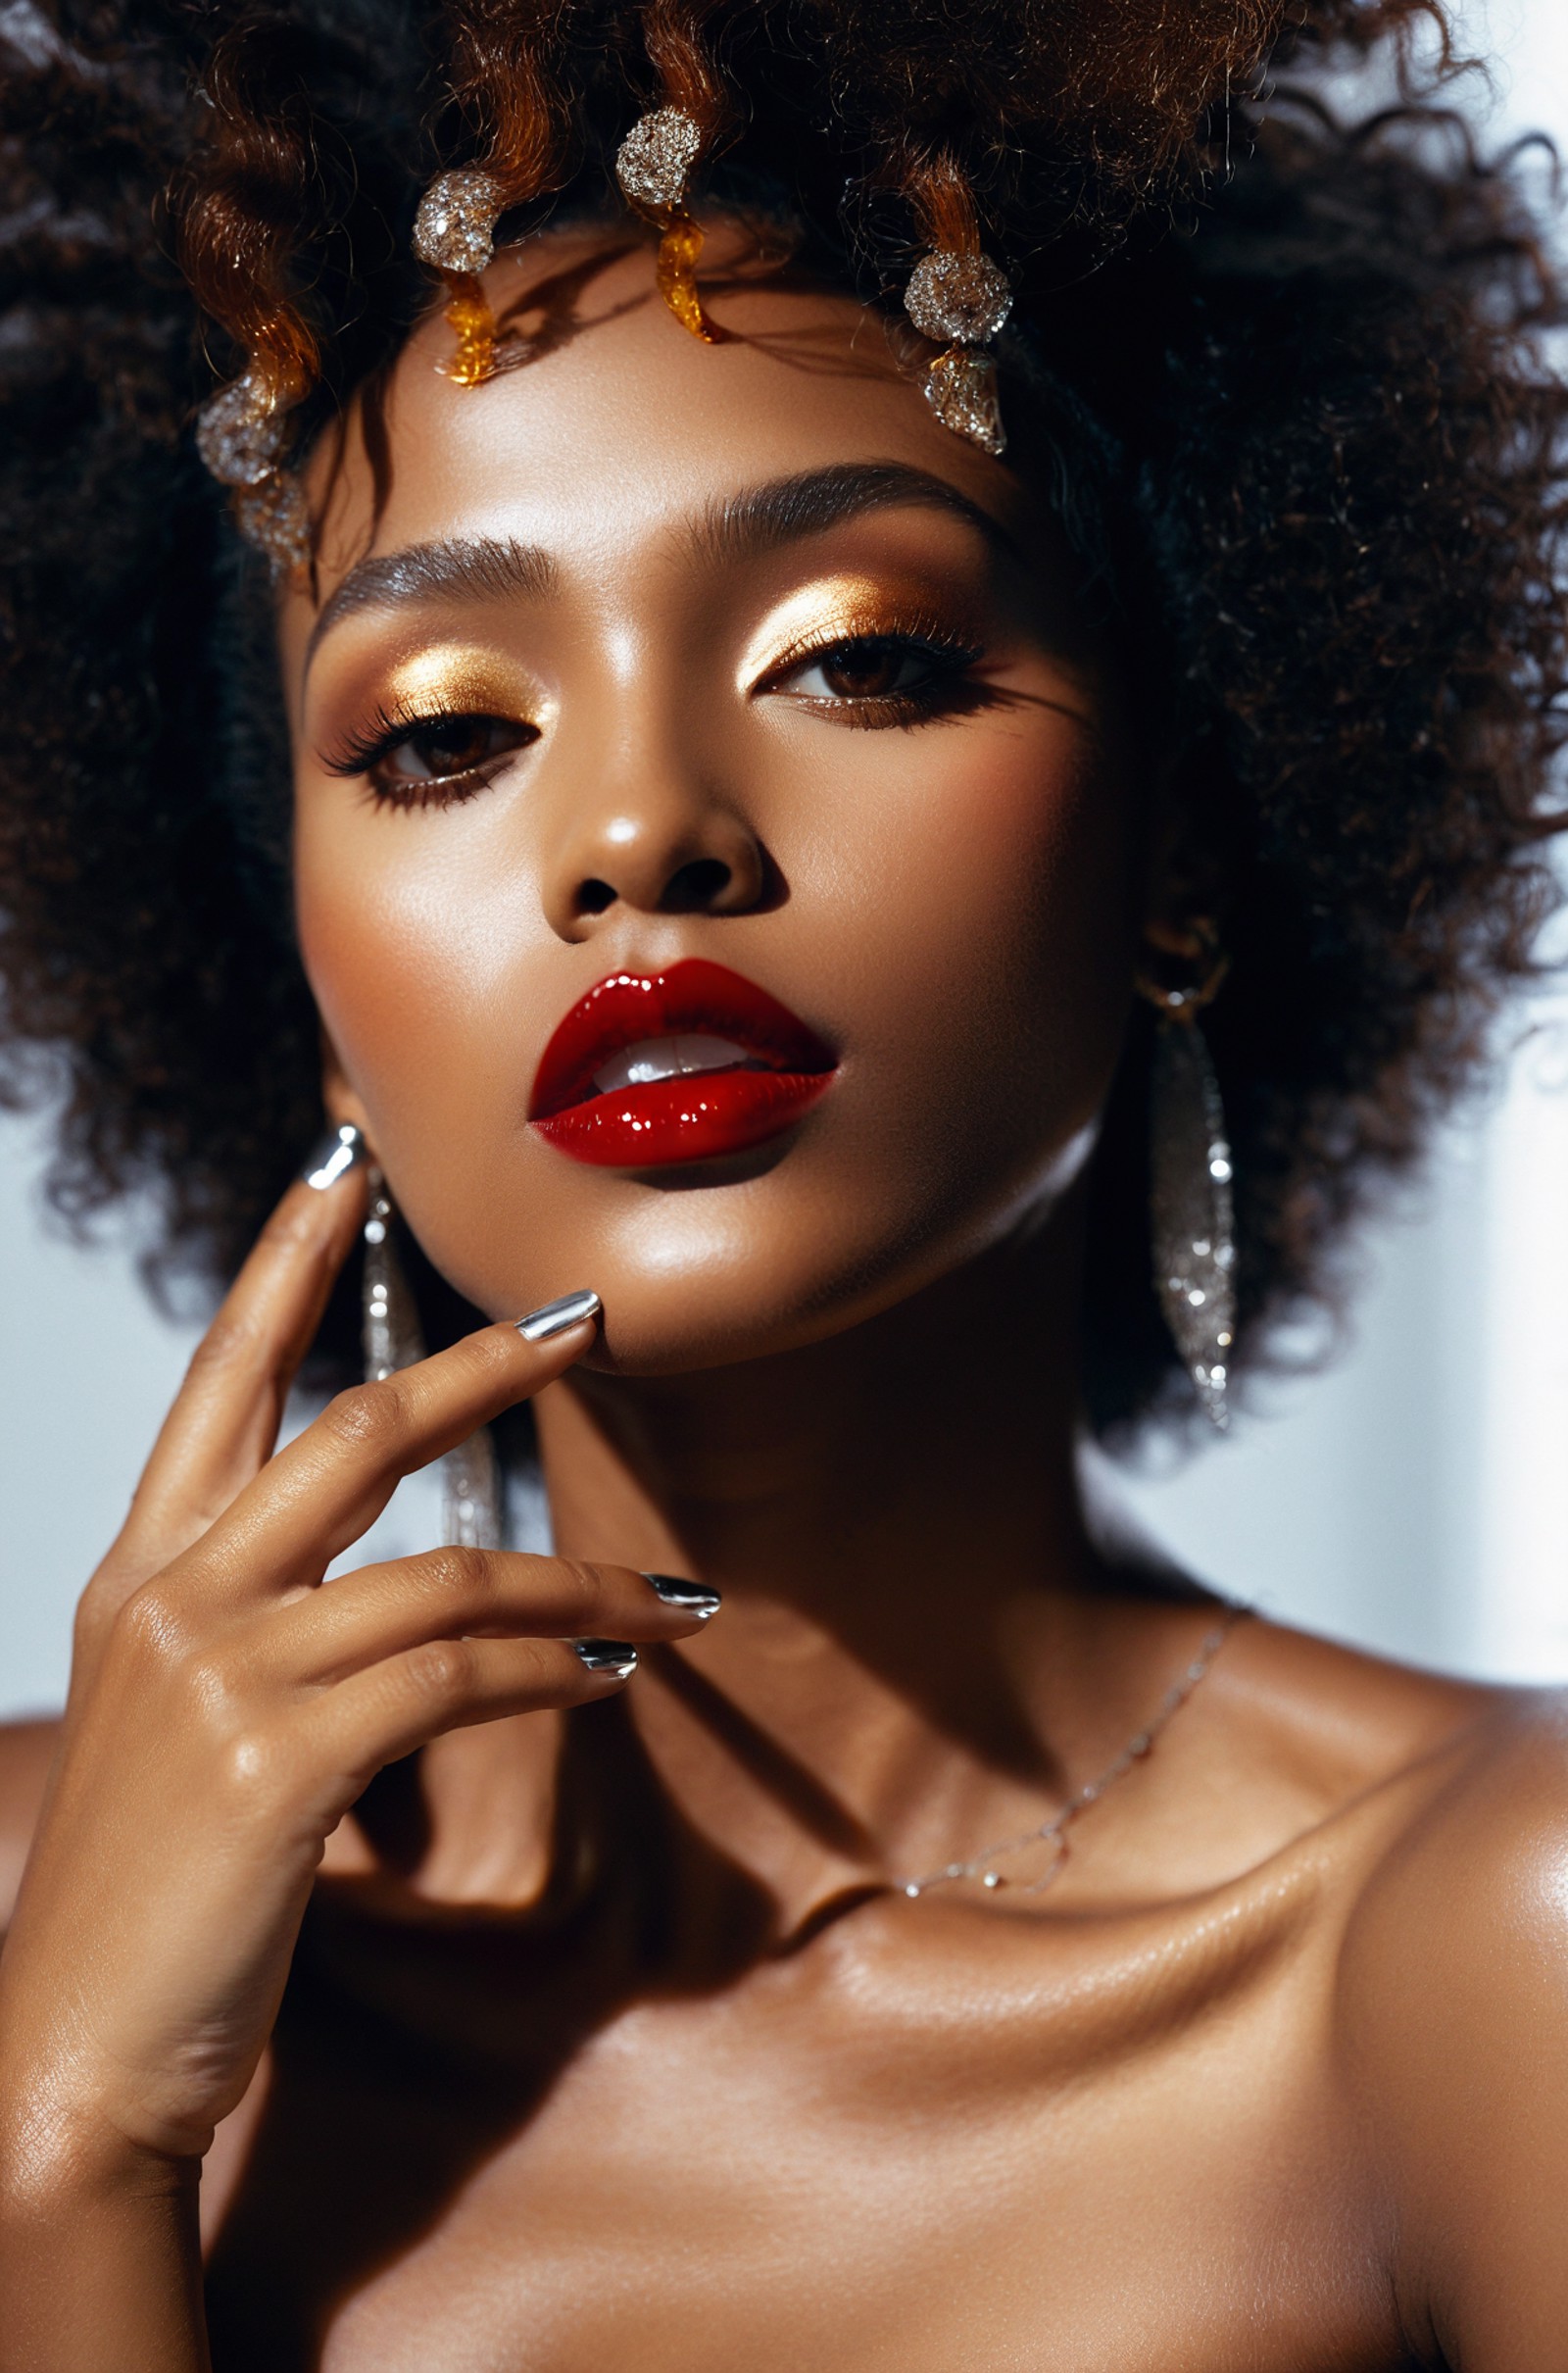 film aesthetic,Striking portrait, high-key lighting, close-up of a young woman of African descent, vibrant makeup emphasiz...